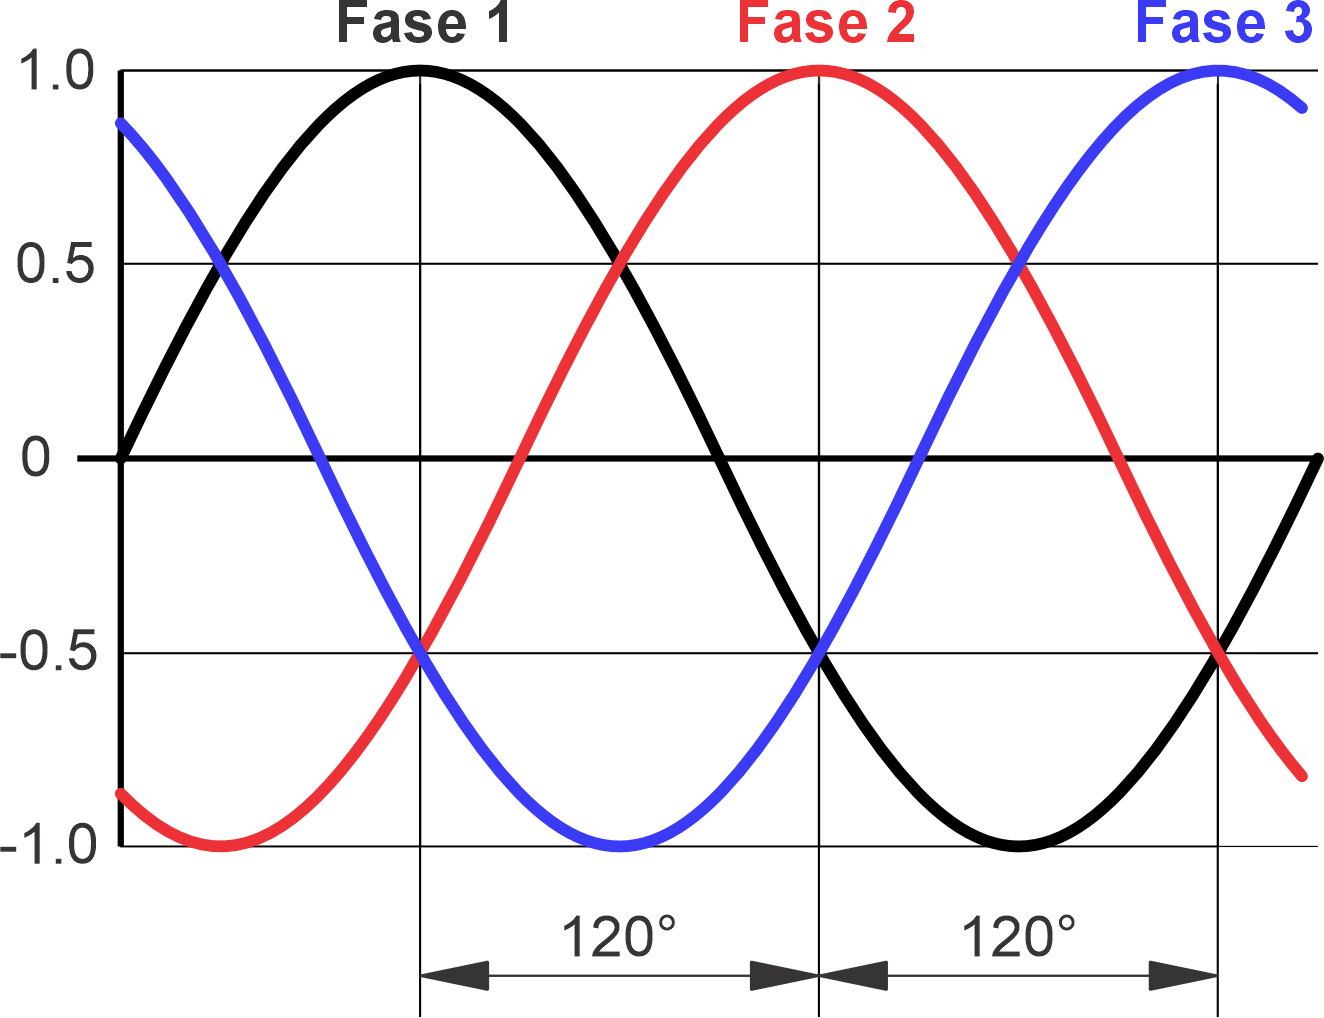 AC_-_3-phase_sine_waves.png